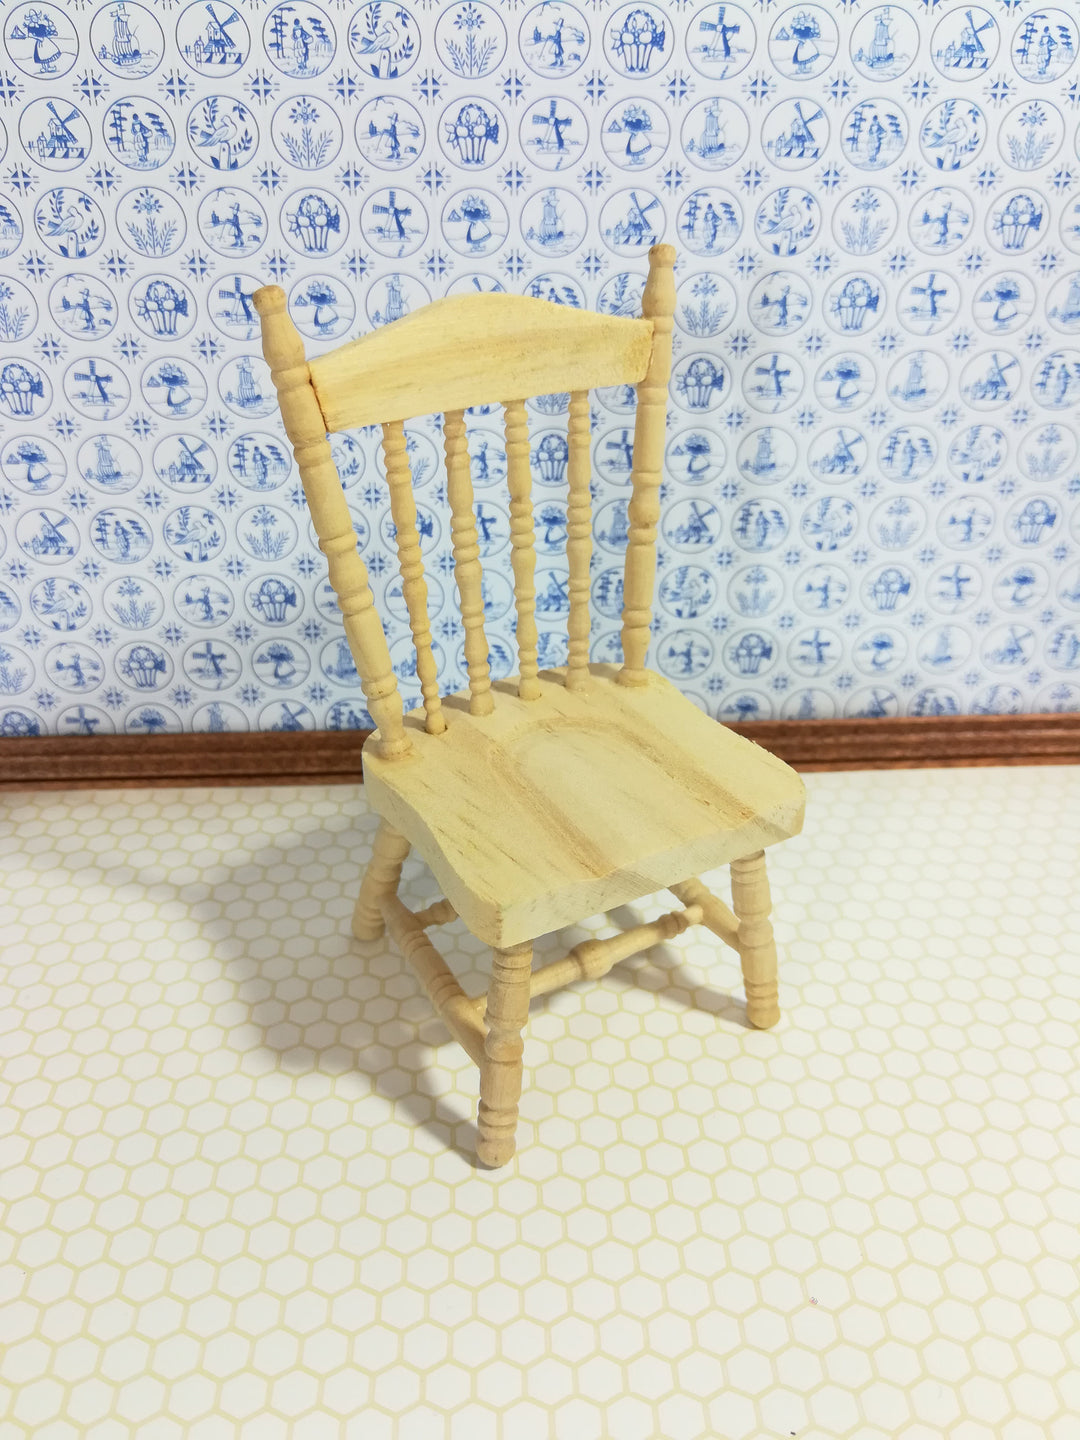 Dollhouse Spindle Back Kitchen Chair Unpainted Wood 1:12 Scale Miniature